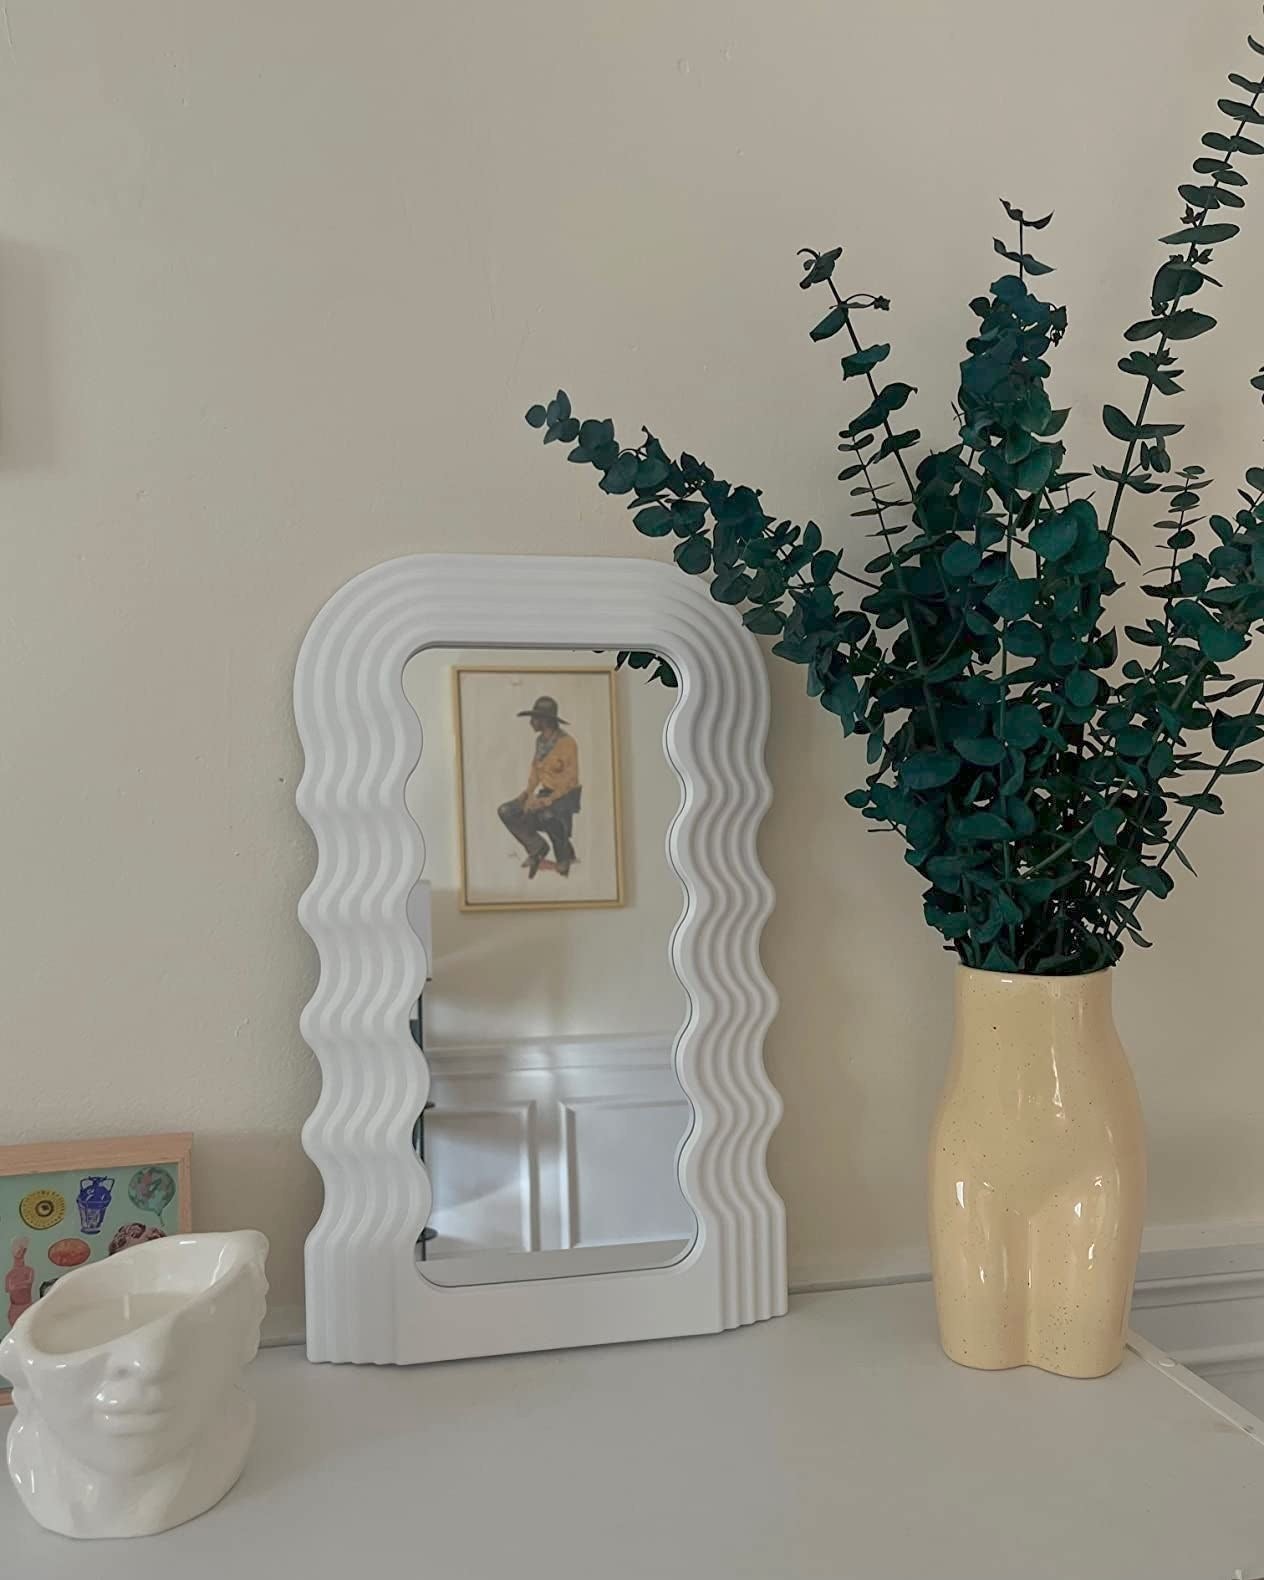 These Decor Trends Took Over TikTok Last Year—Here's What to Expect in 2023